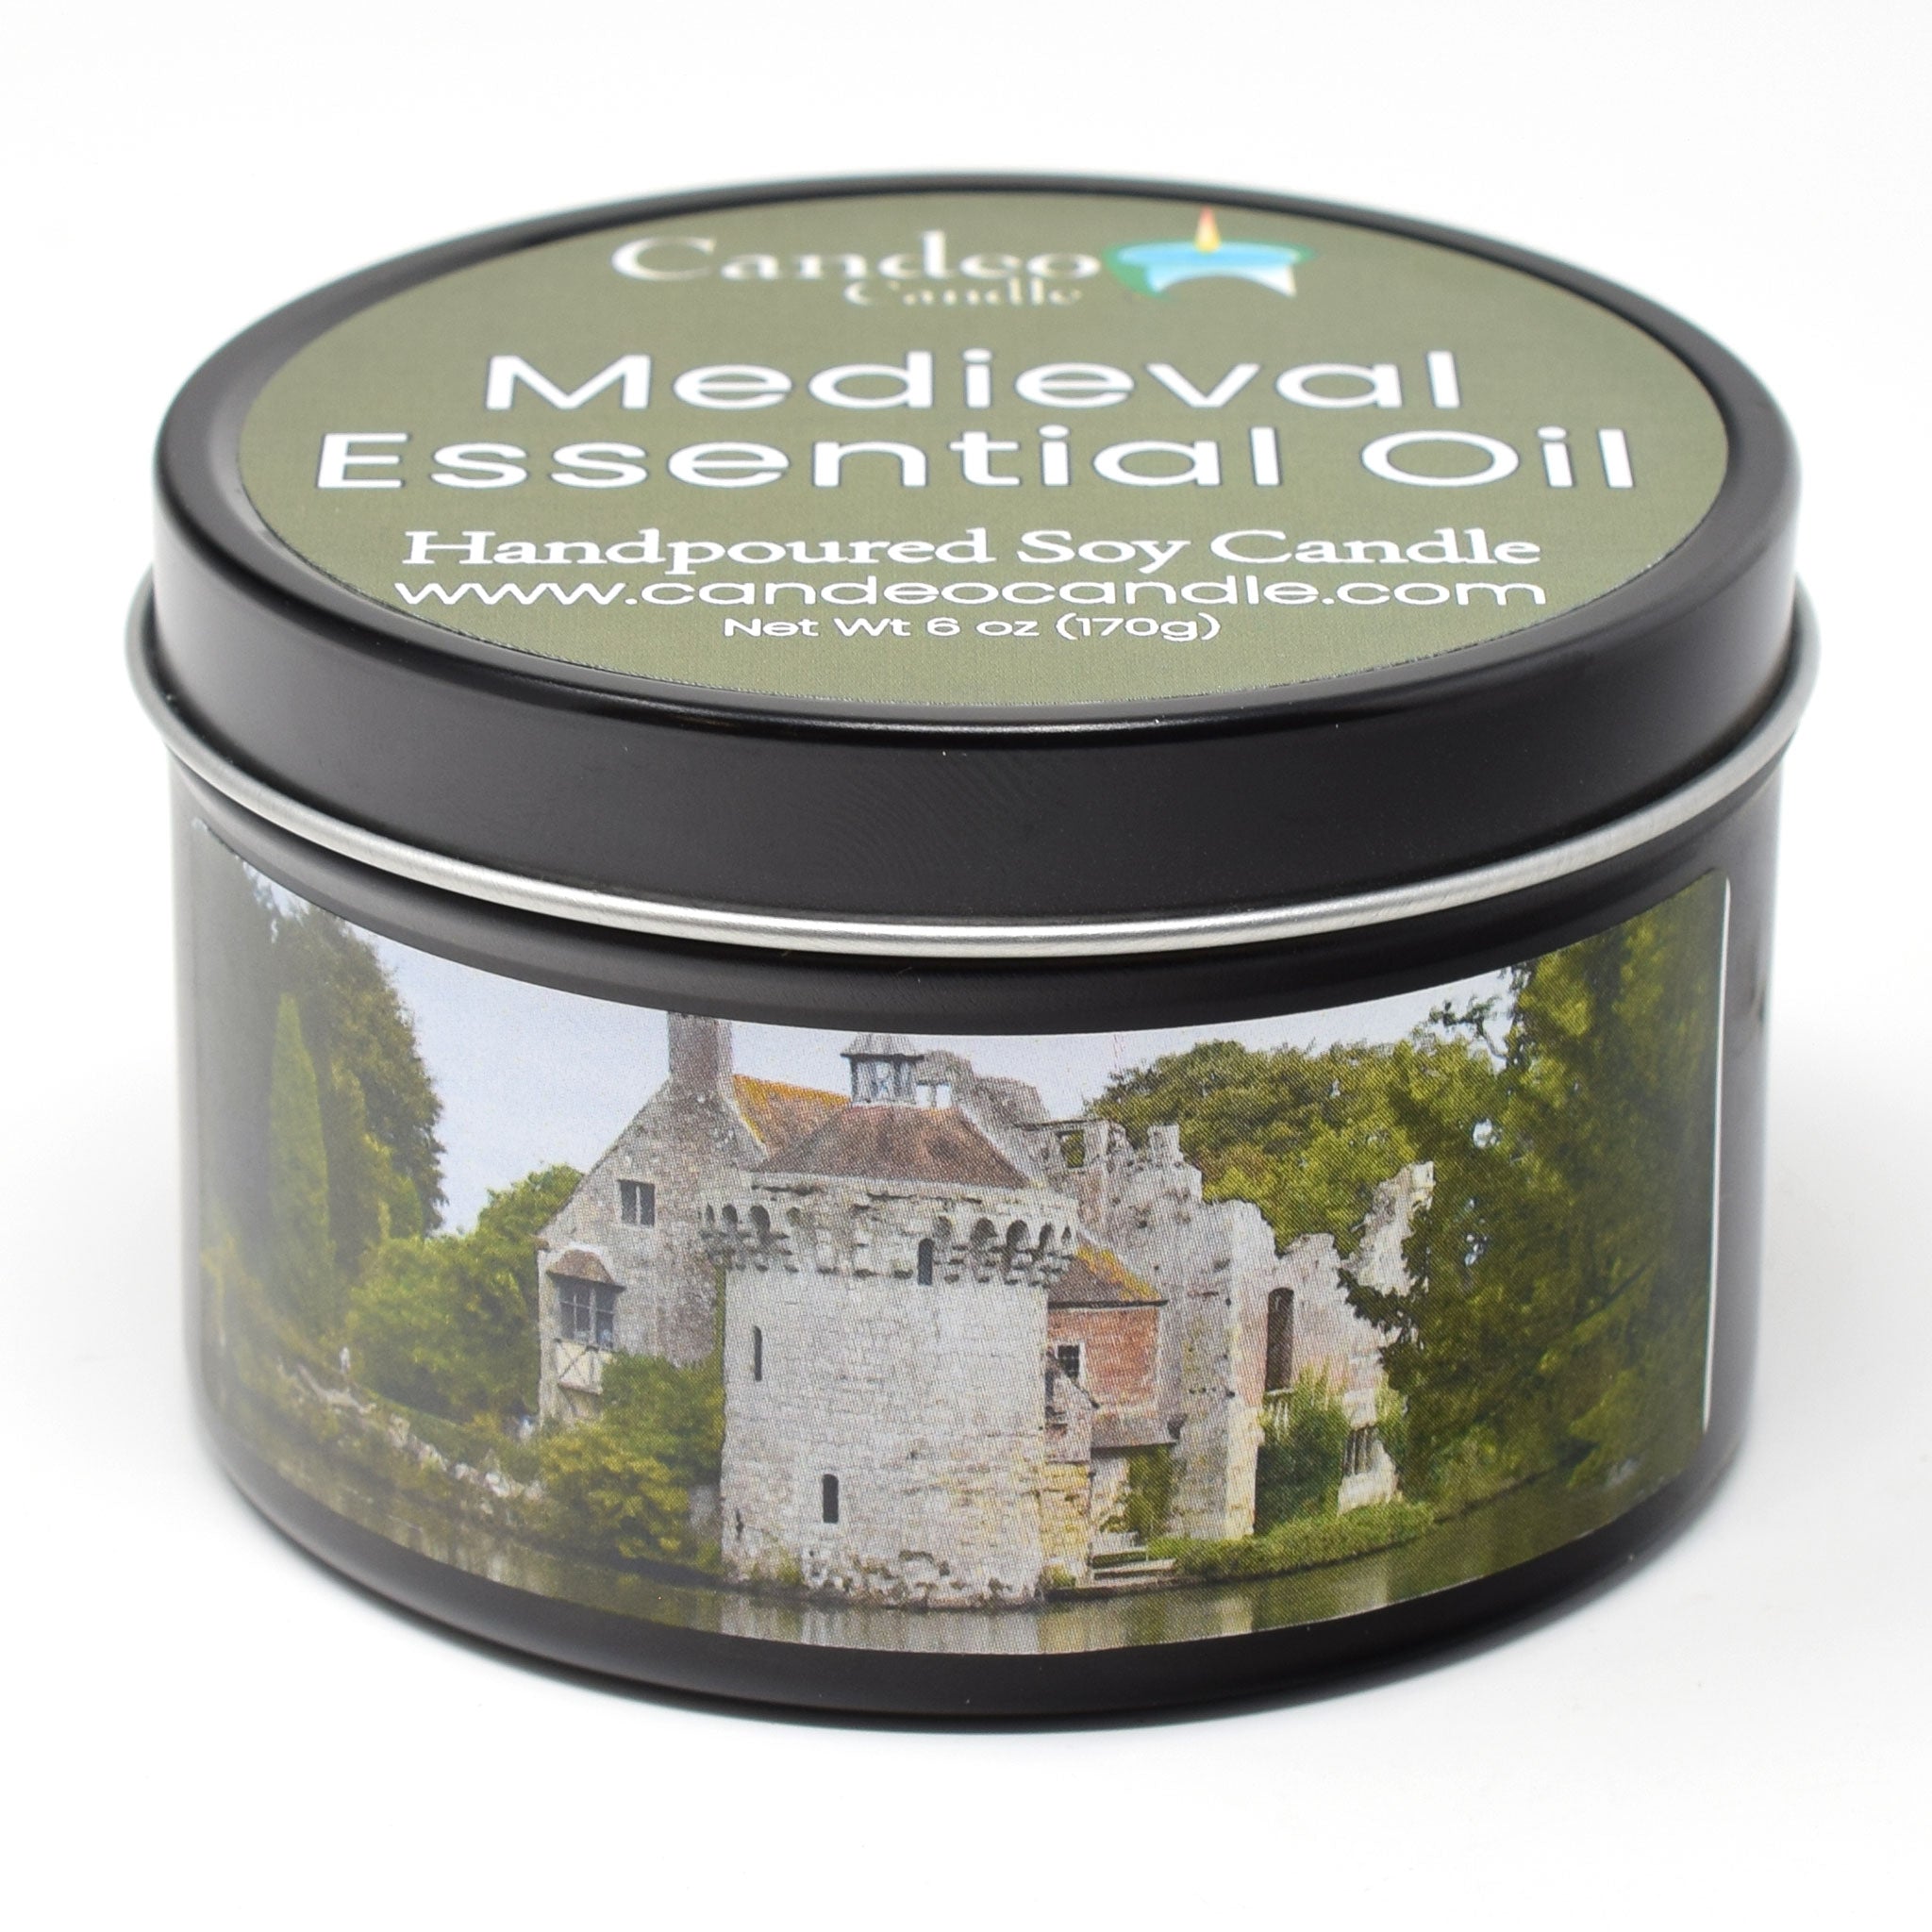 Medieval Essential Oil, 6oz Soy Candle Tin